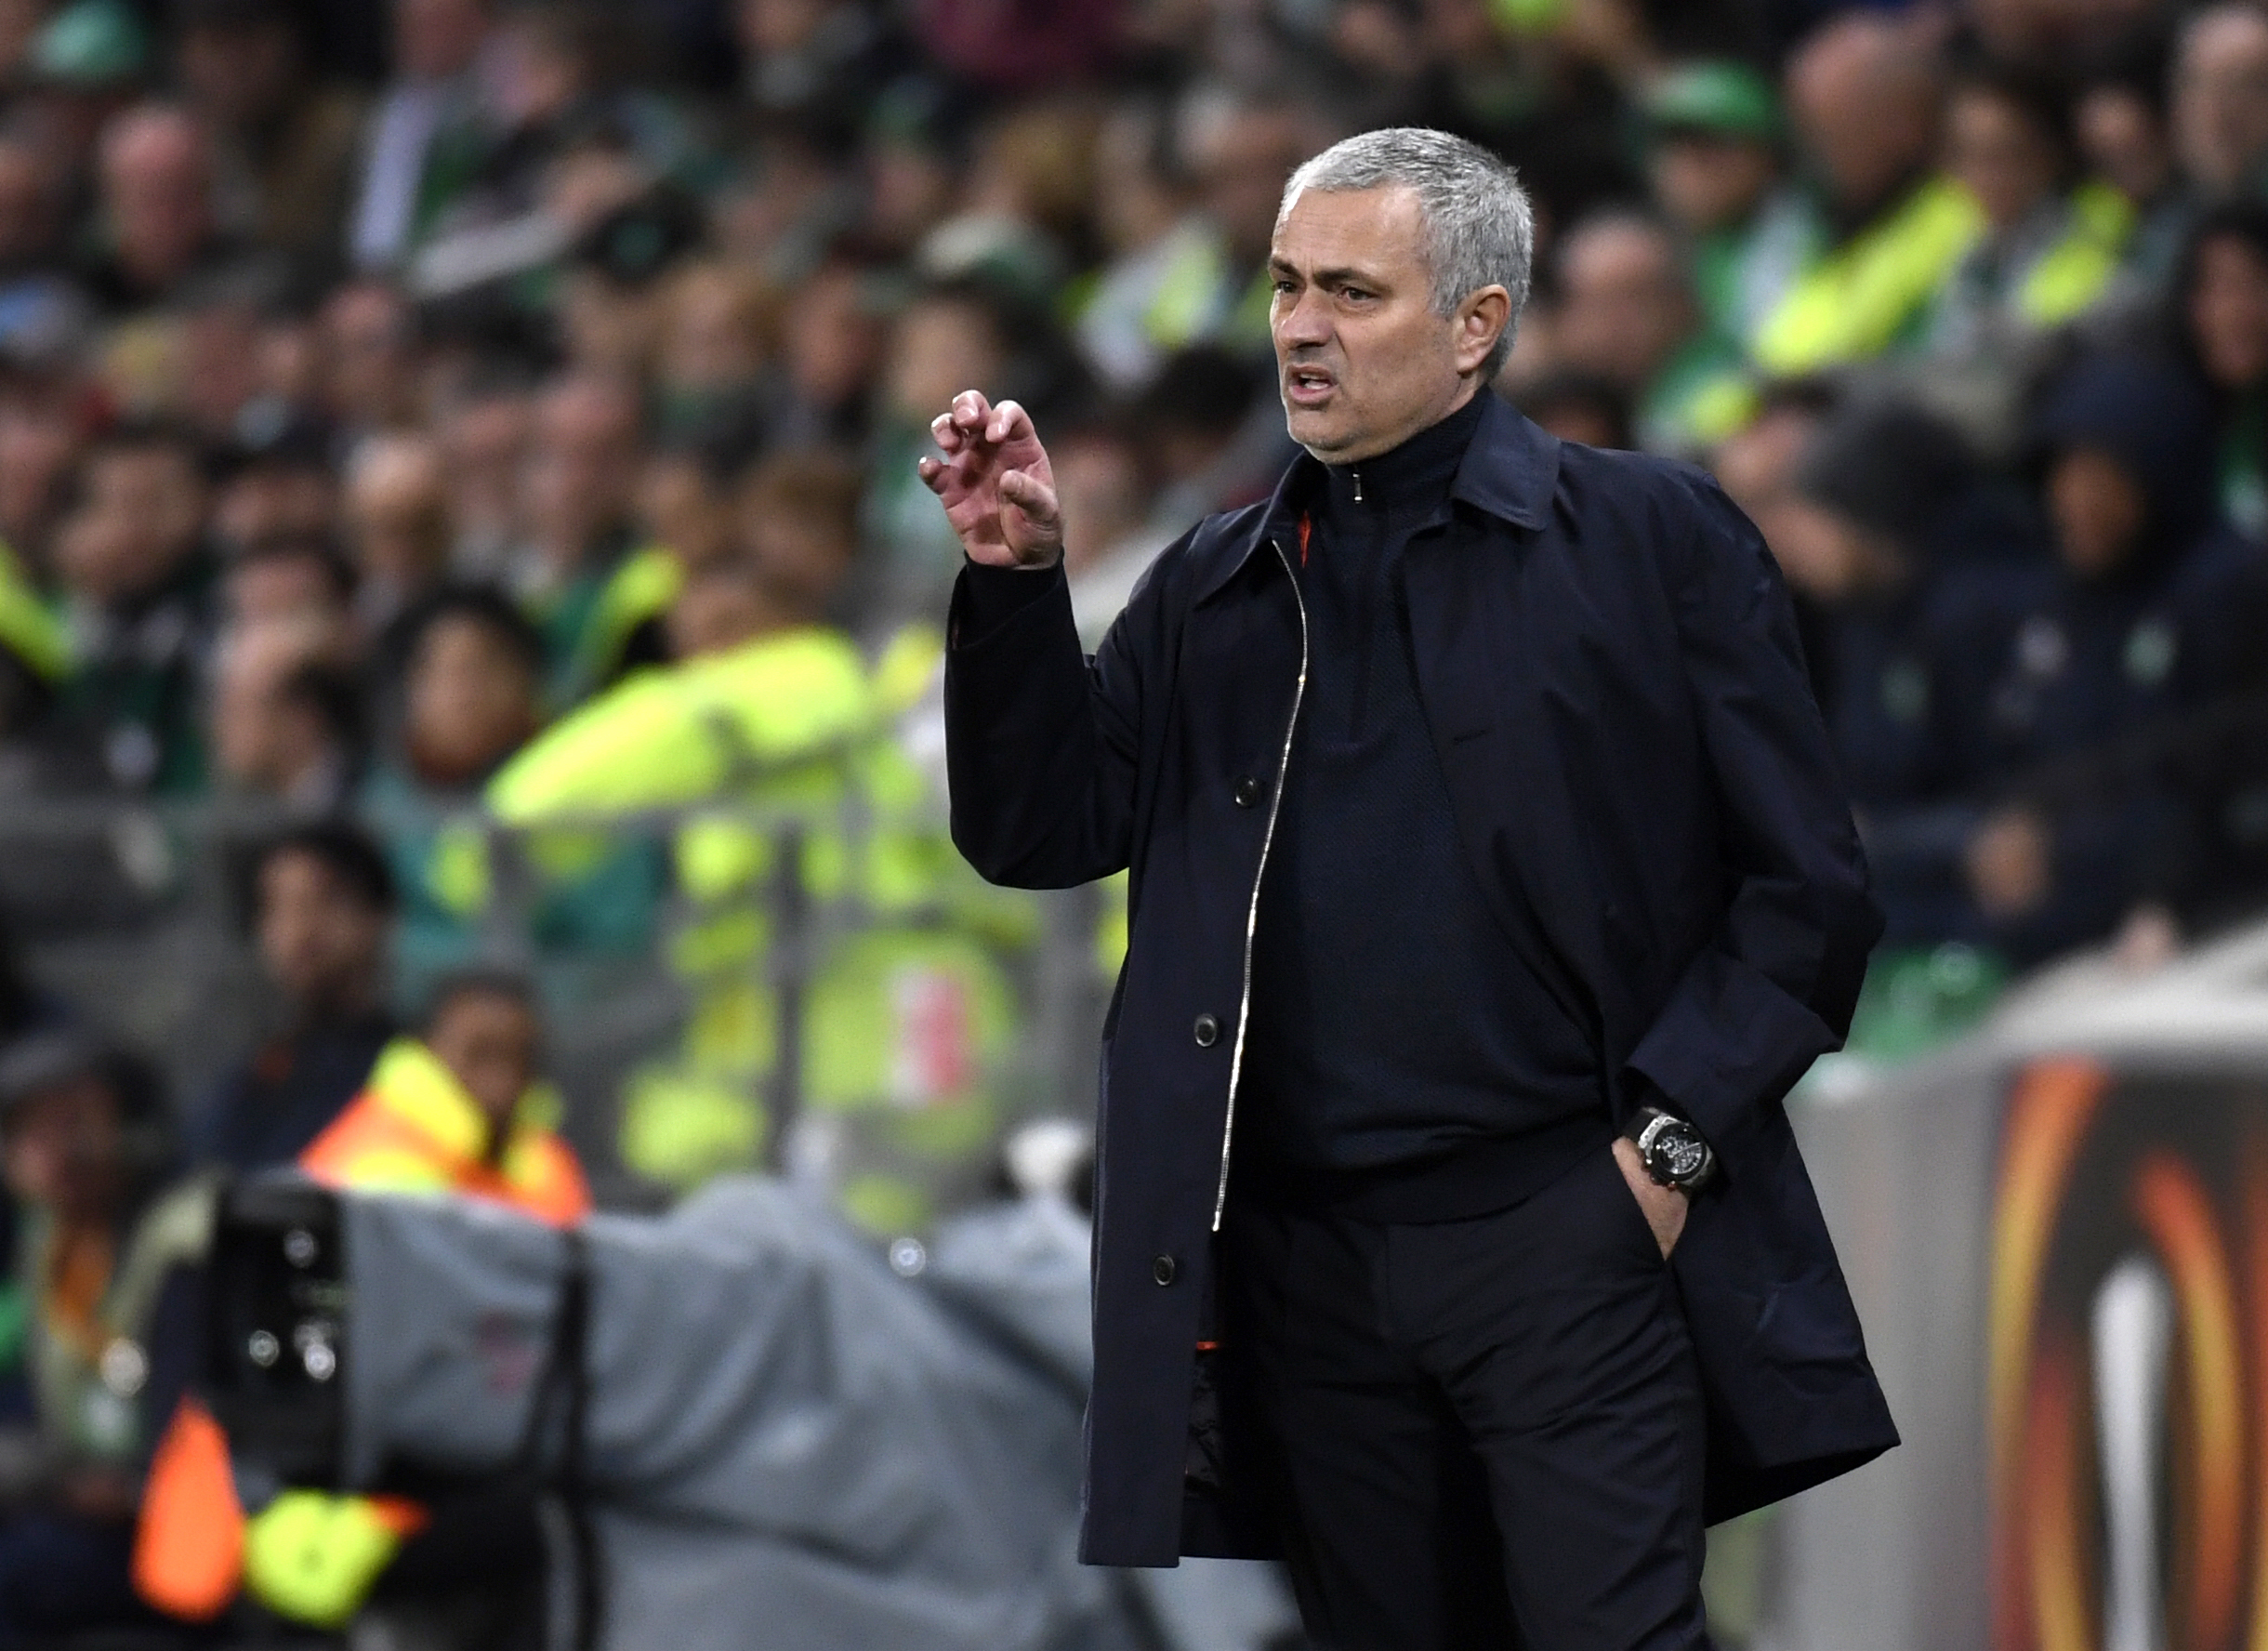 Manchester United's Portuguese coach Jose Mourinho gestures during the UEFA Europa League football match between AS Saint-Etienne and Manchester United on February 22, 2017, at the Geoffroy Guichard stadium in Saint-Etienne, central France. / AFP / PHILIPPE DESMAZES        (Photo credit should read PHILIPPE DESMAZES/AFP/Getty Images)